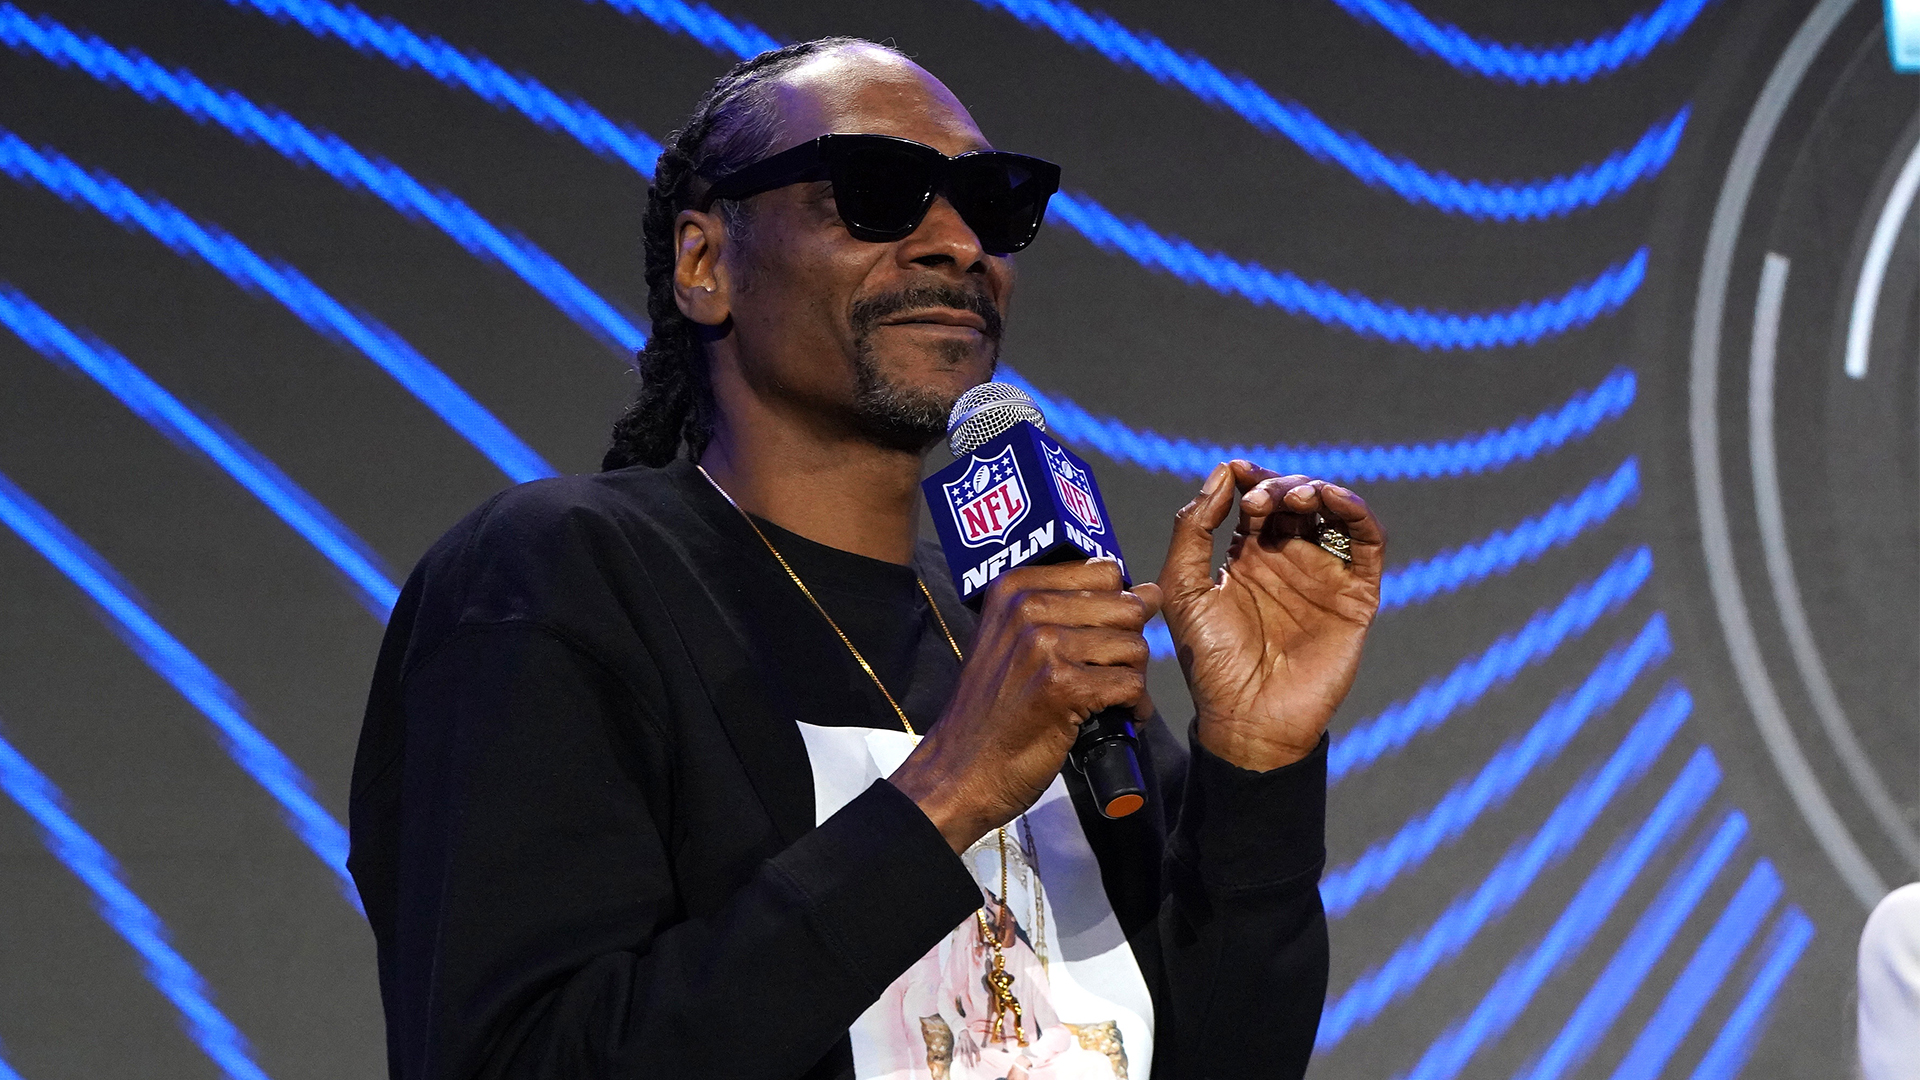 Snoop Dogg Joins Forces With Blockchain Platform Gala Games To Change The Way We Consume Music